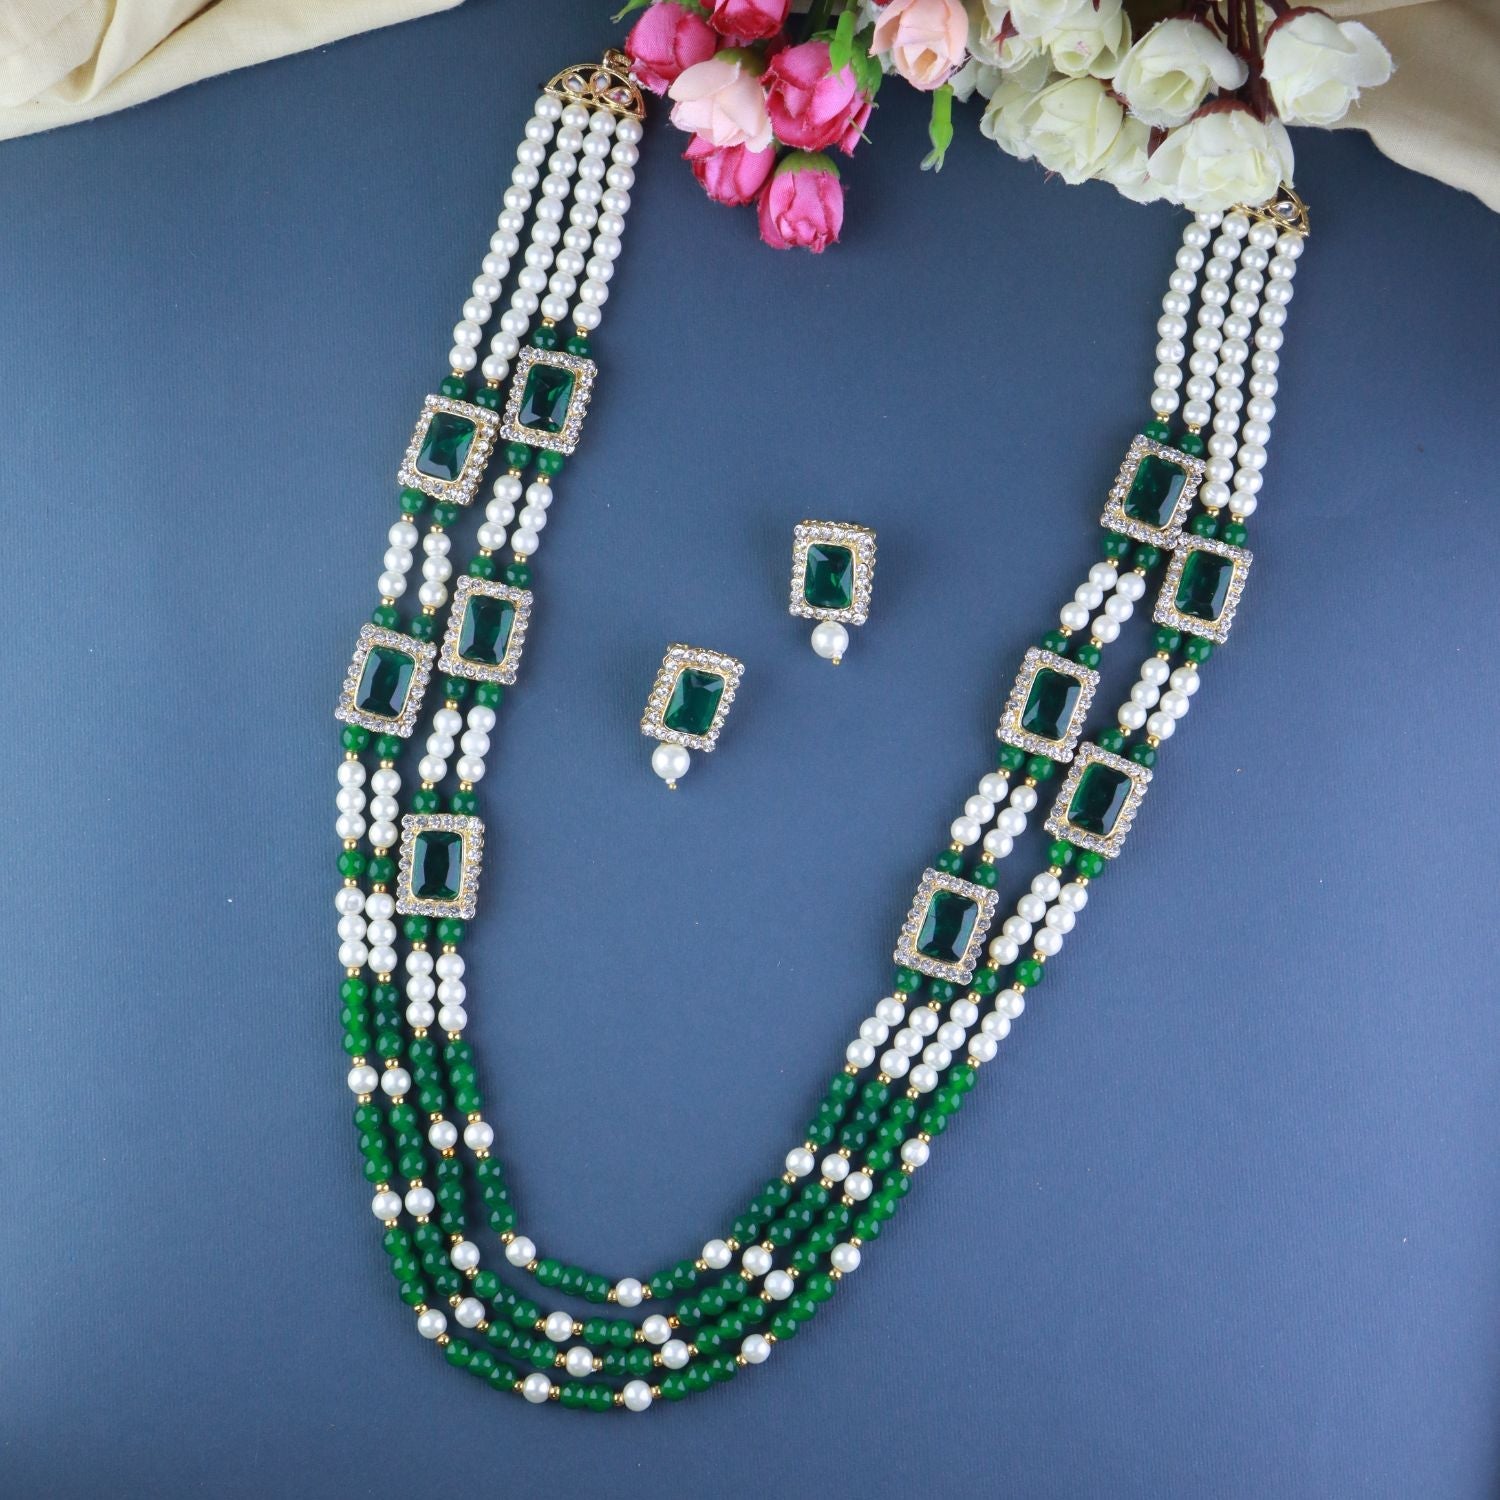 Women's 18K Gold Plated Traditional Green Stone Studded Multi Strand Long Pearl Necklace Jewellery with Stud Earrings Set  - I Jewels